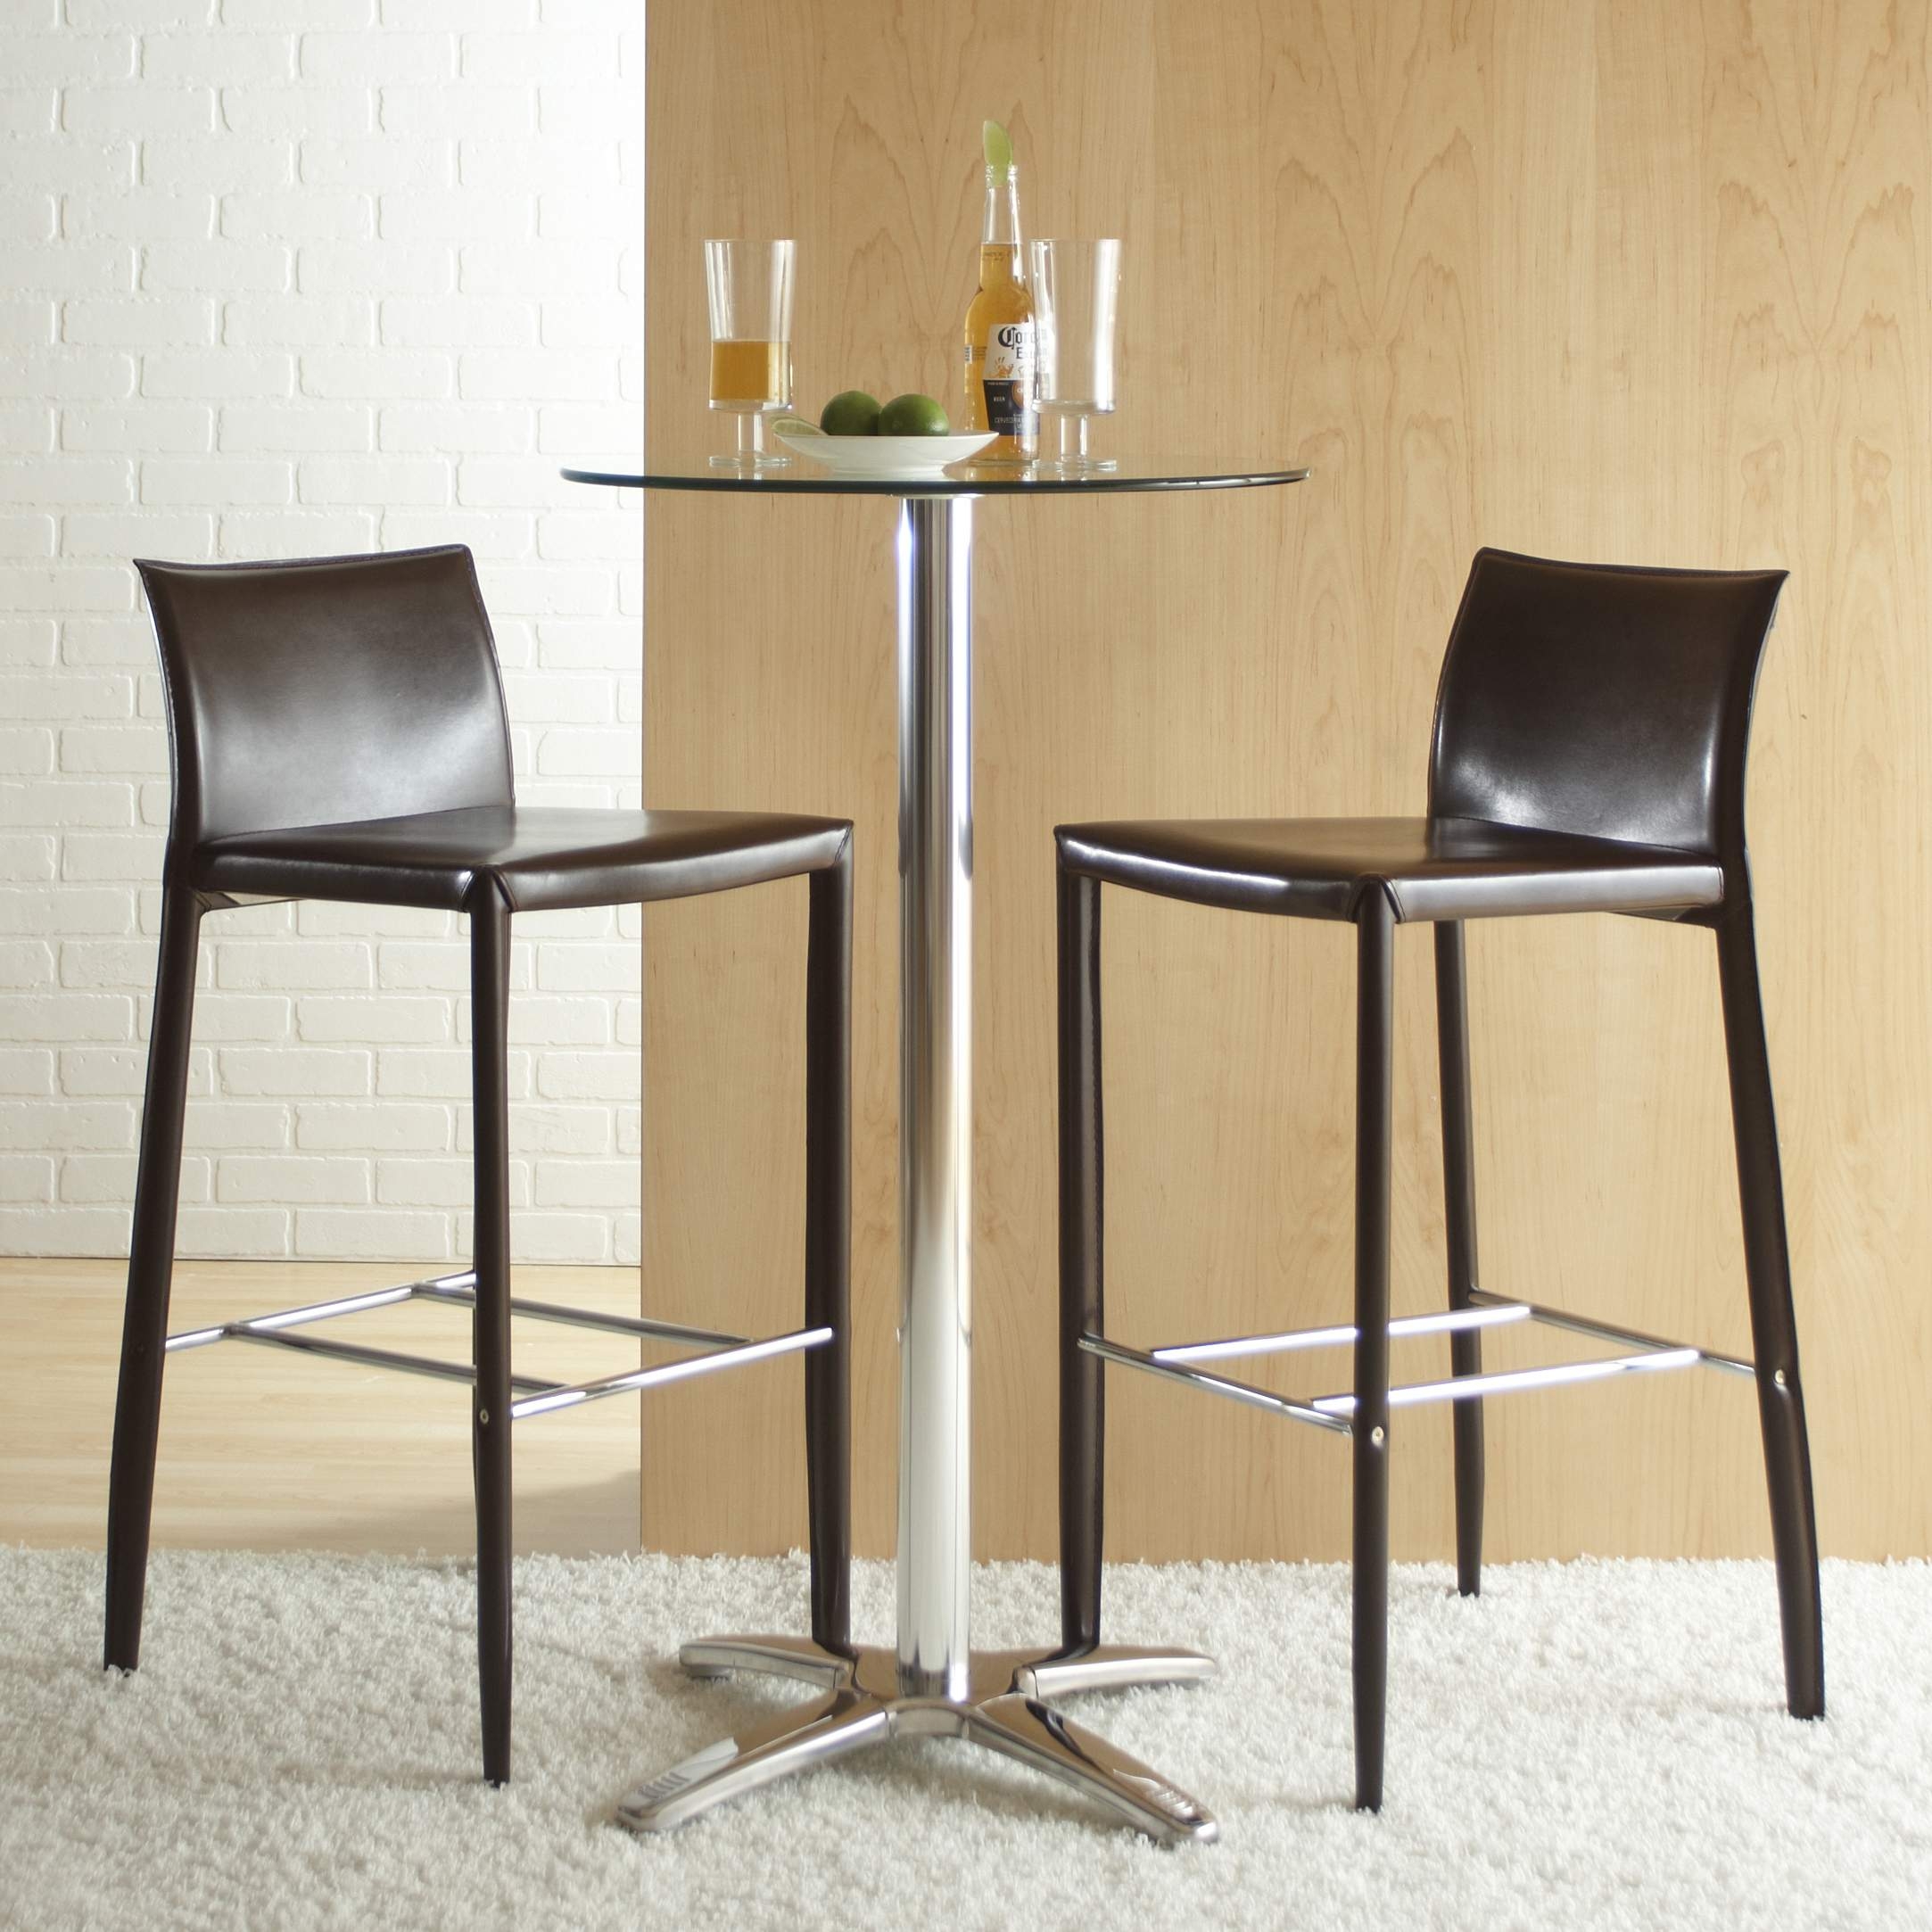 Eurostyle Shelby 30 Inch Seat Height Leather Bar Stool (set of 2)